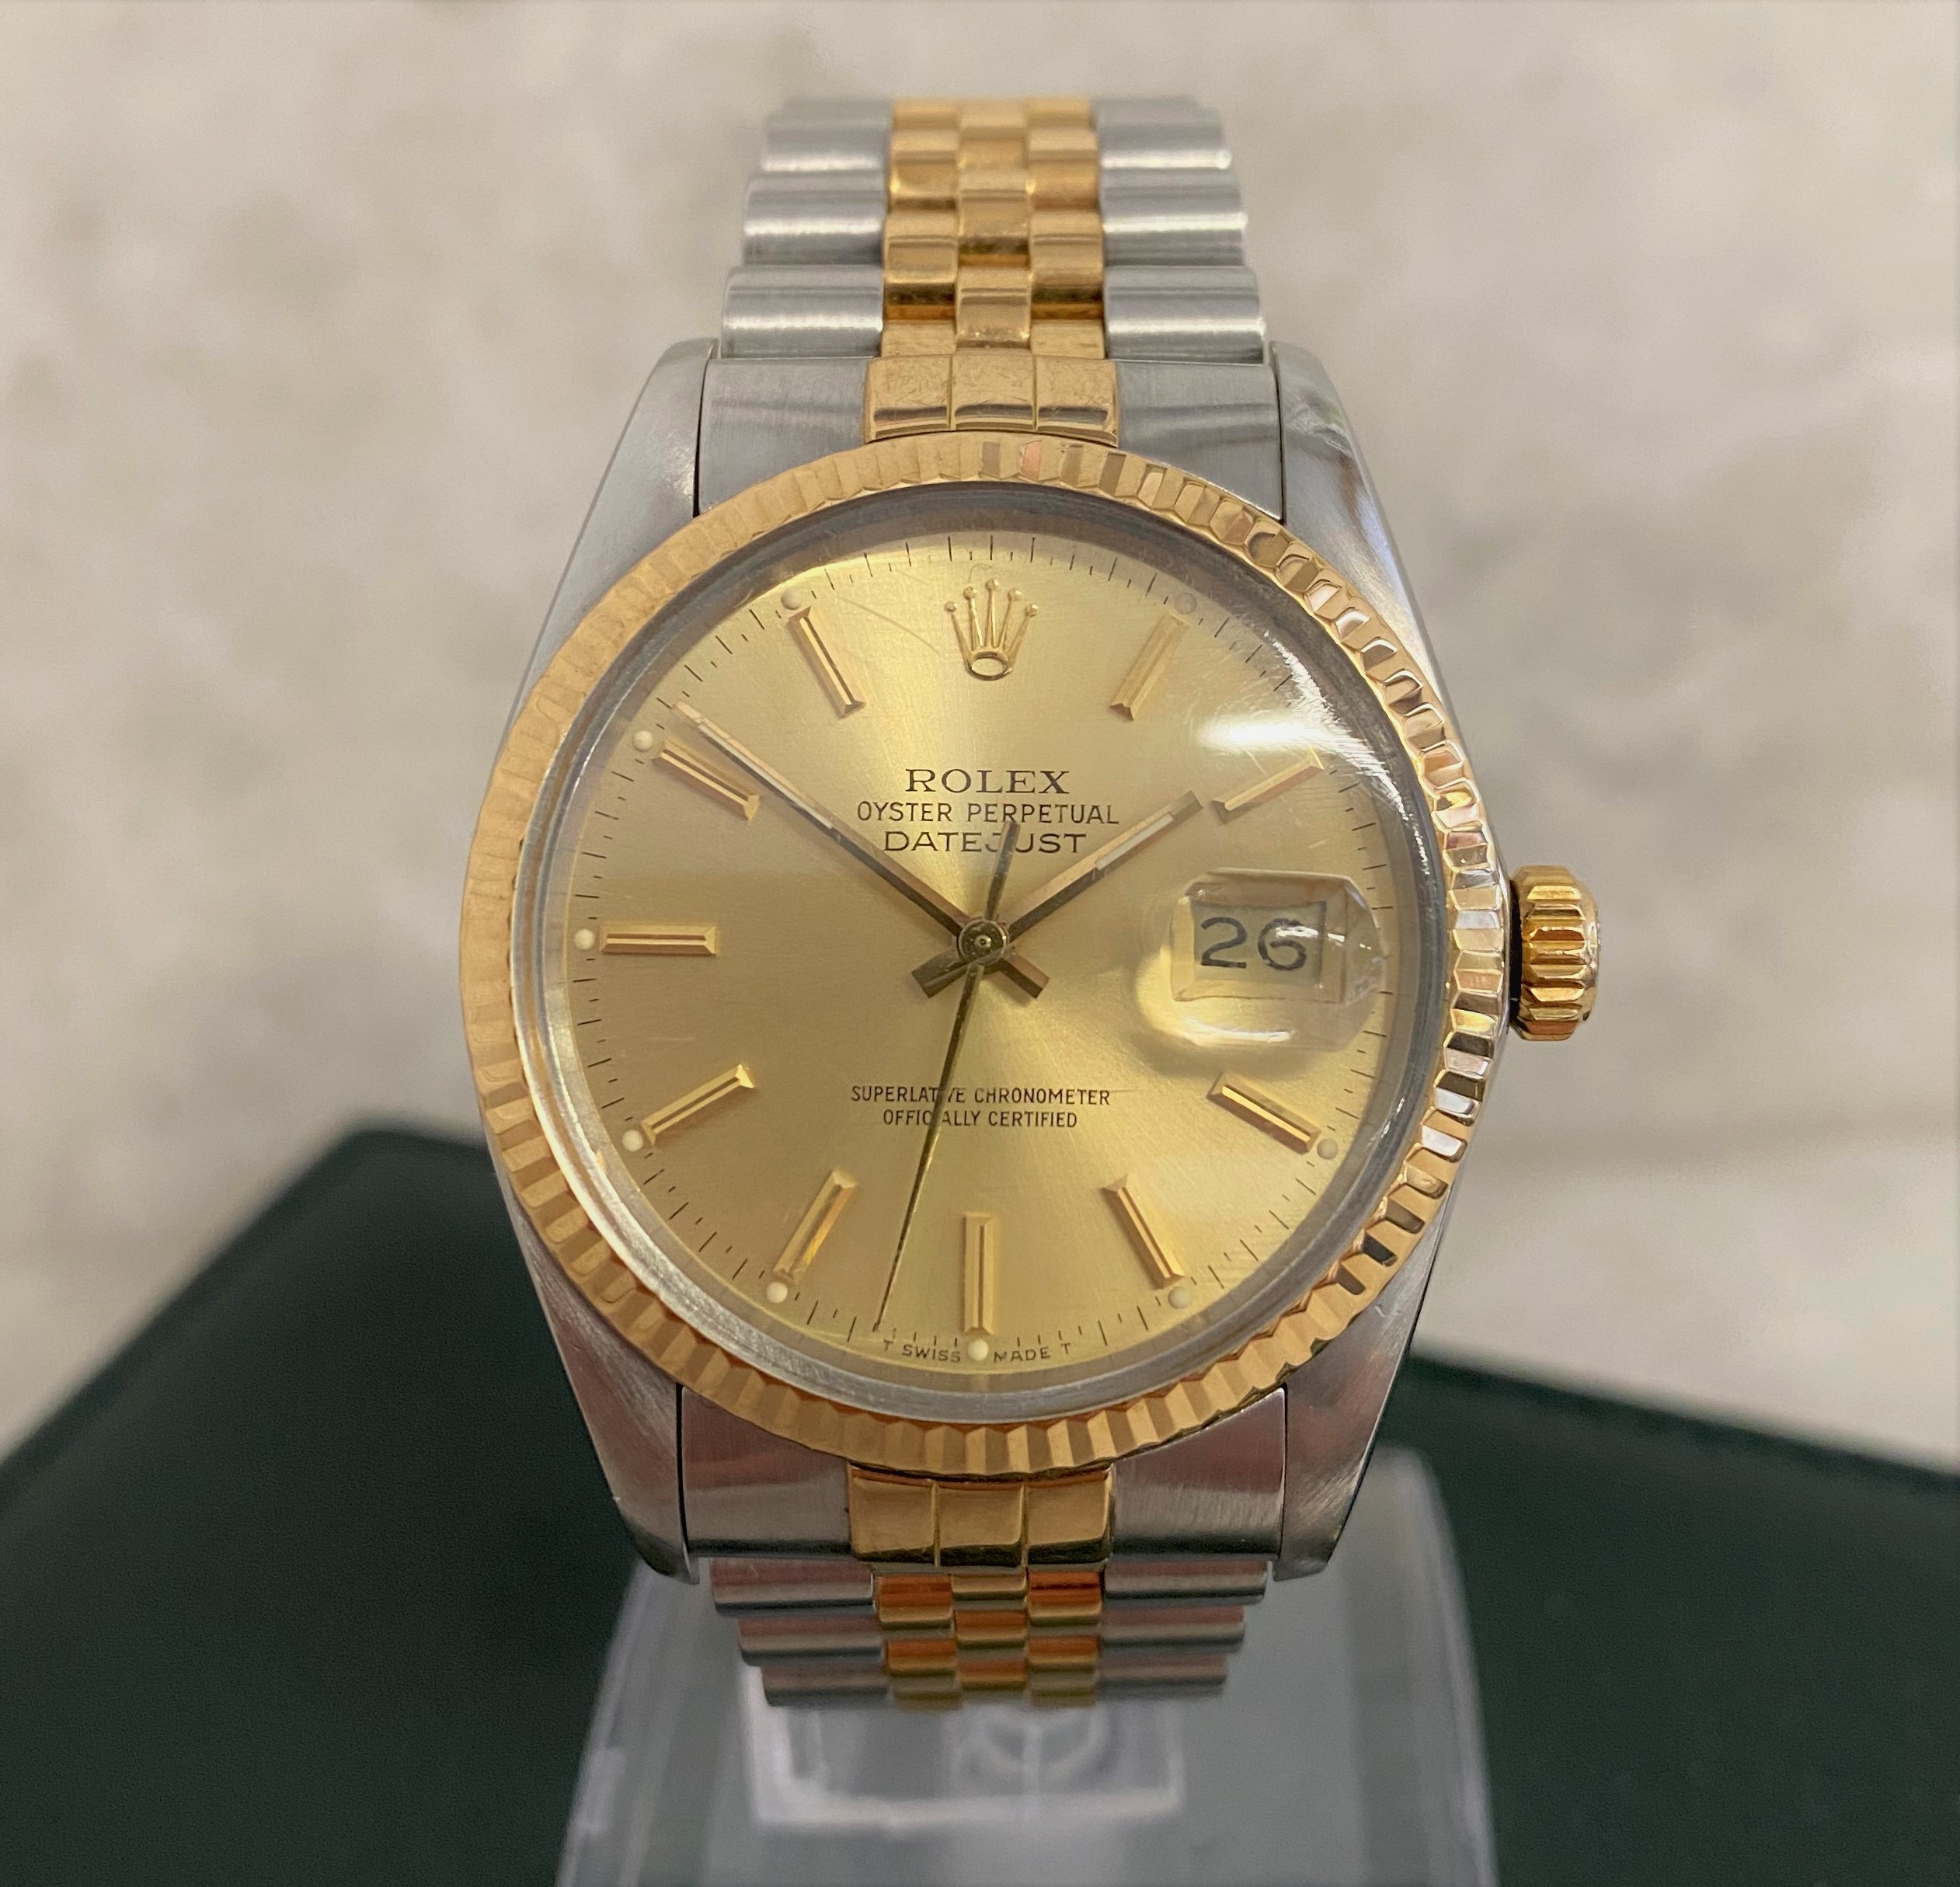 Rolex Datejust 36 - REF: 16013. Beautiful Example. Box And Manuals ...